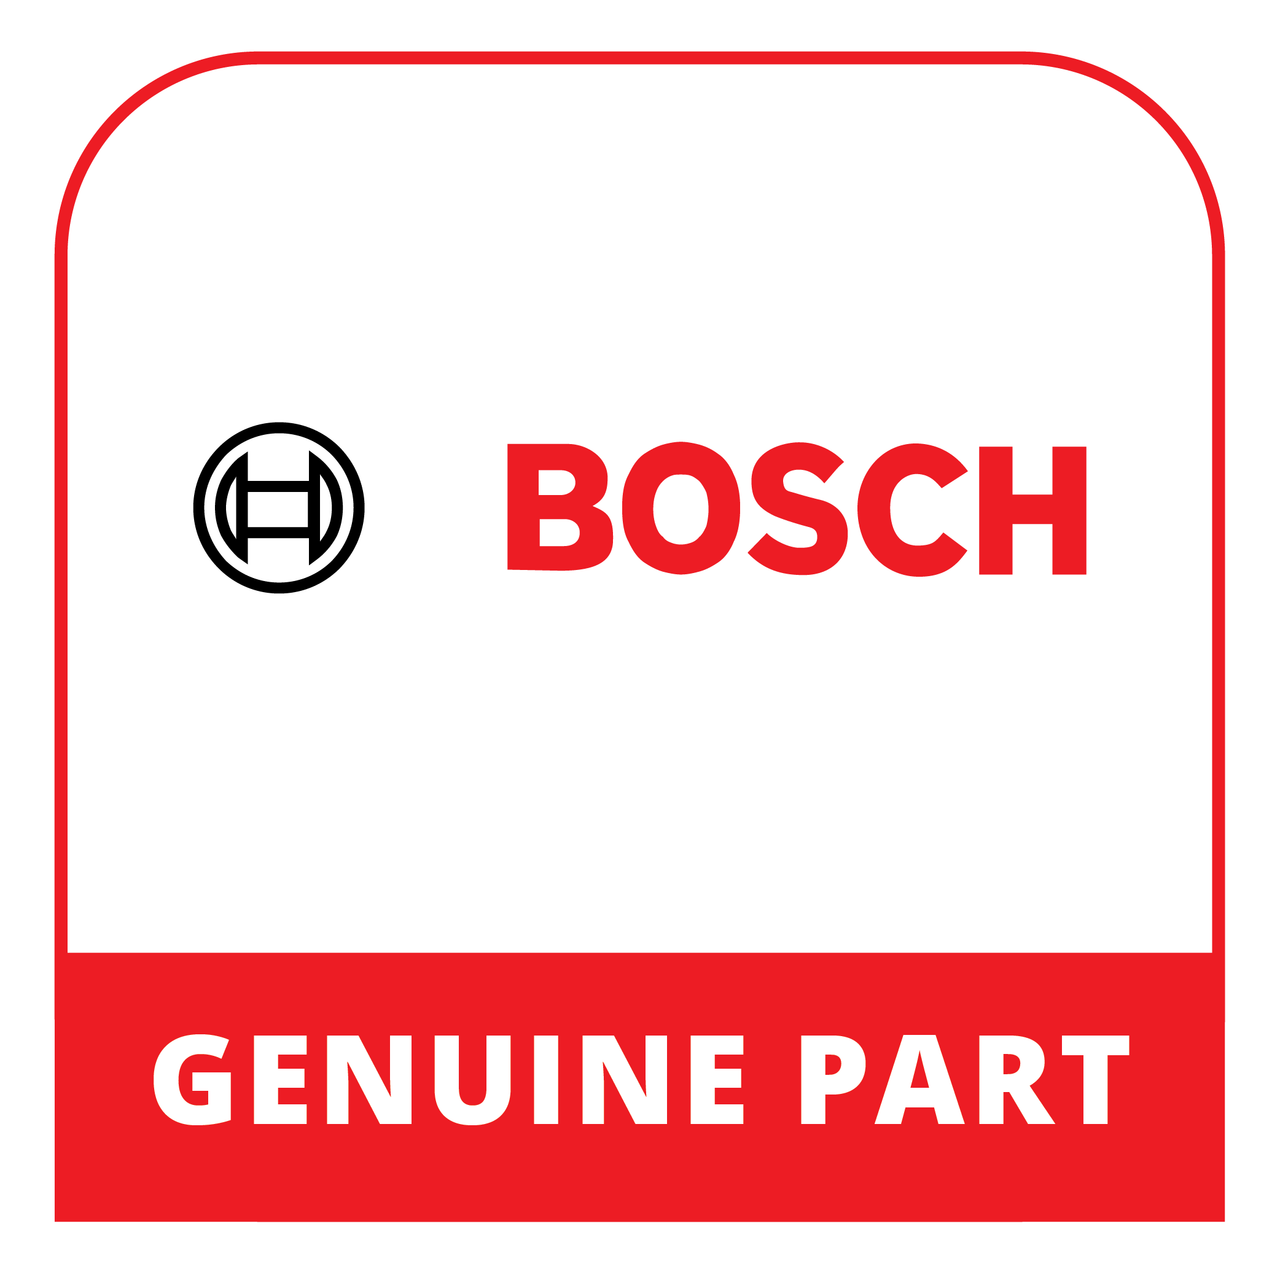 Bosch (Thermador) 20000003 - Cover Sheet - Genuine Bosch (Thermador) Part